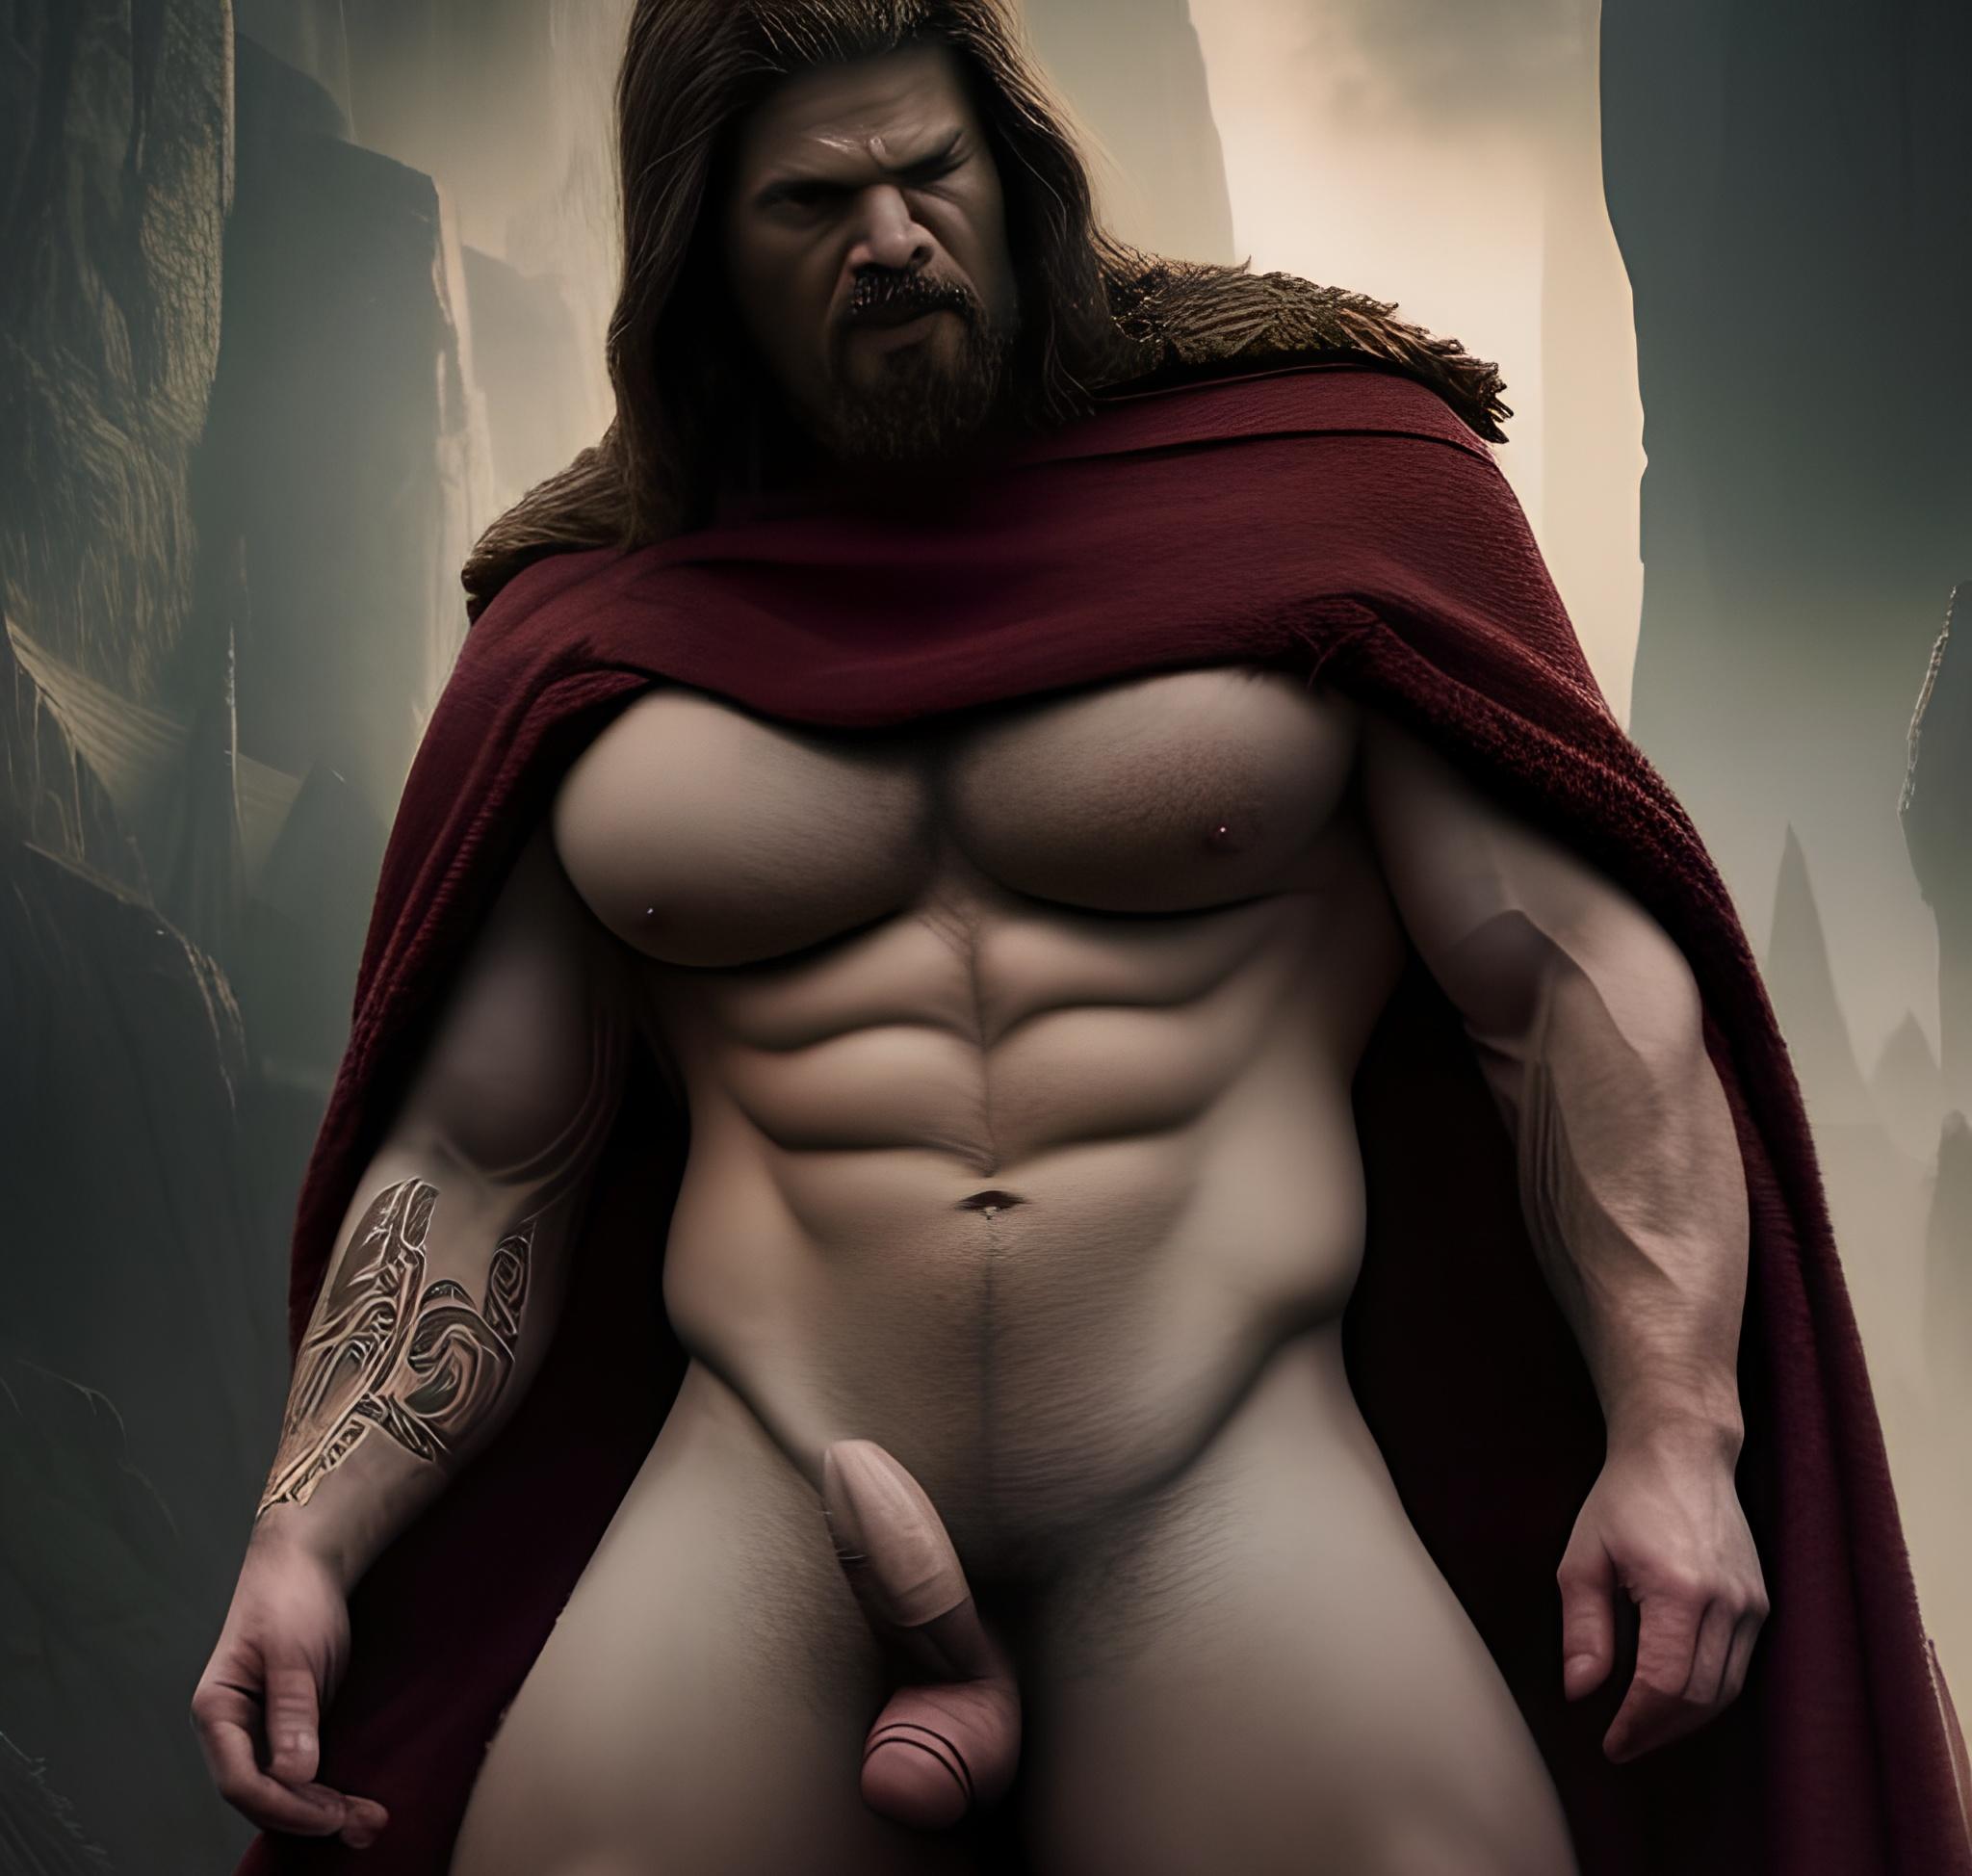 30yo Viking Bodybuilders Erect Thick Big Dick in Dark Fantasy Mountains Angry Black Hair, Partially Nude,